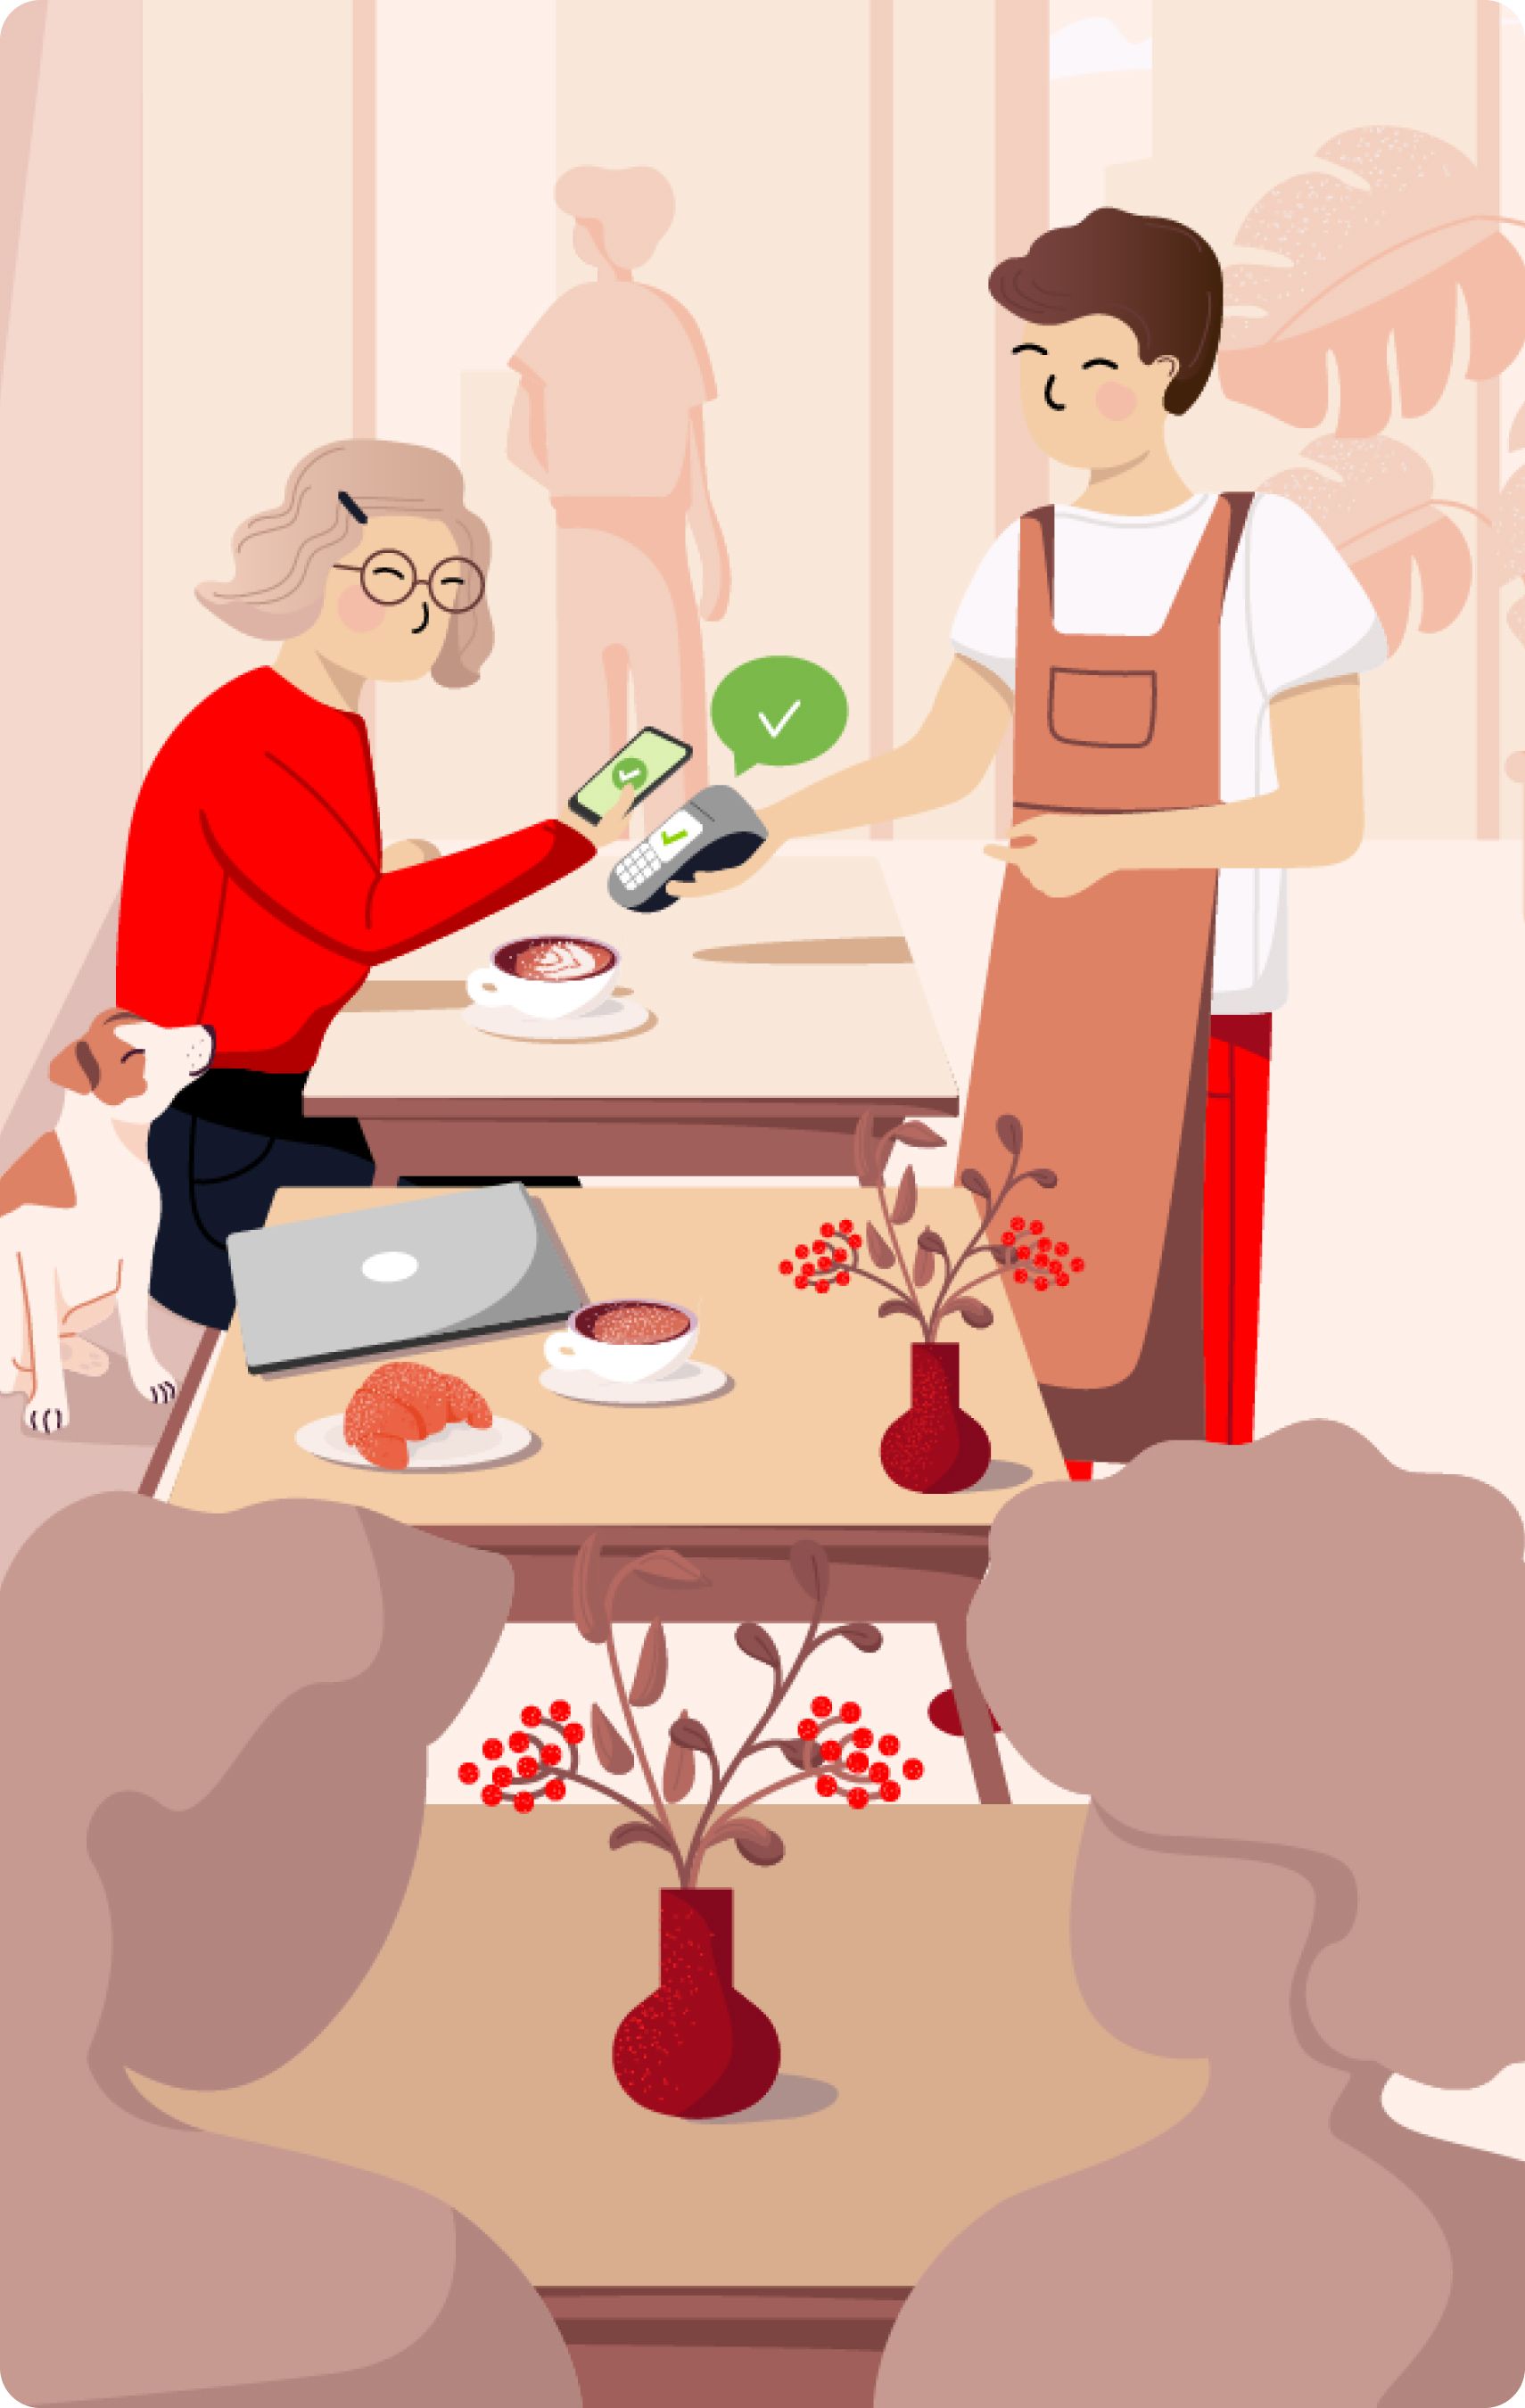 Illustration of a person paying contactless inside a restaurant.